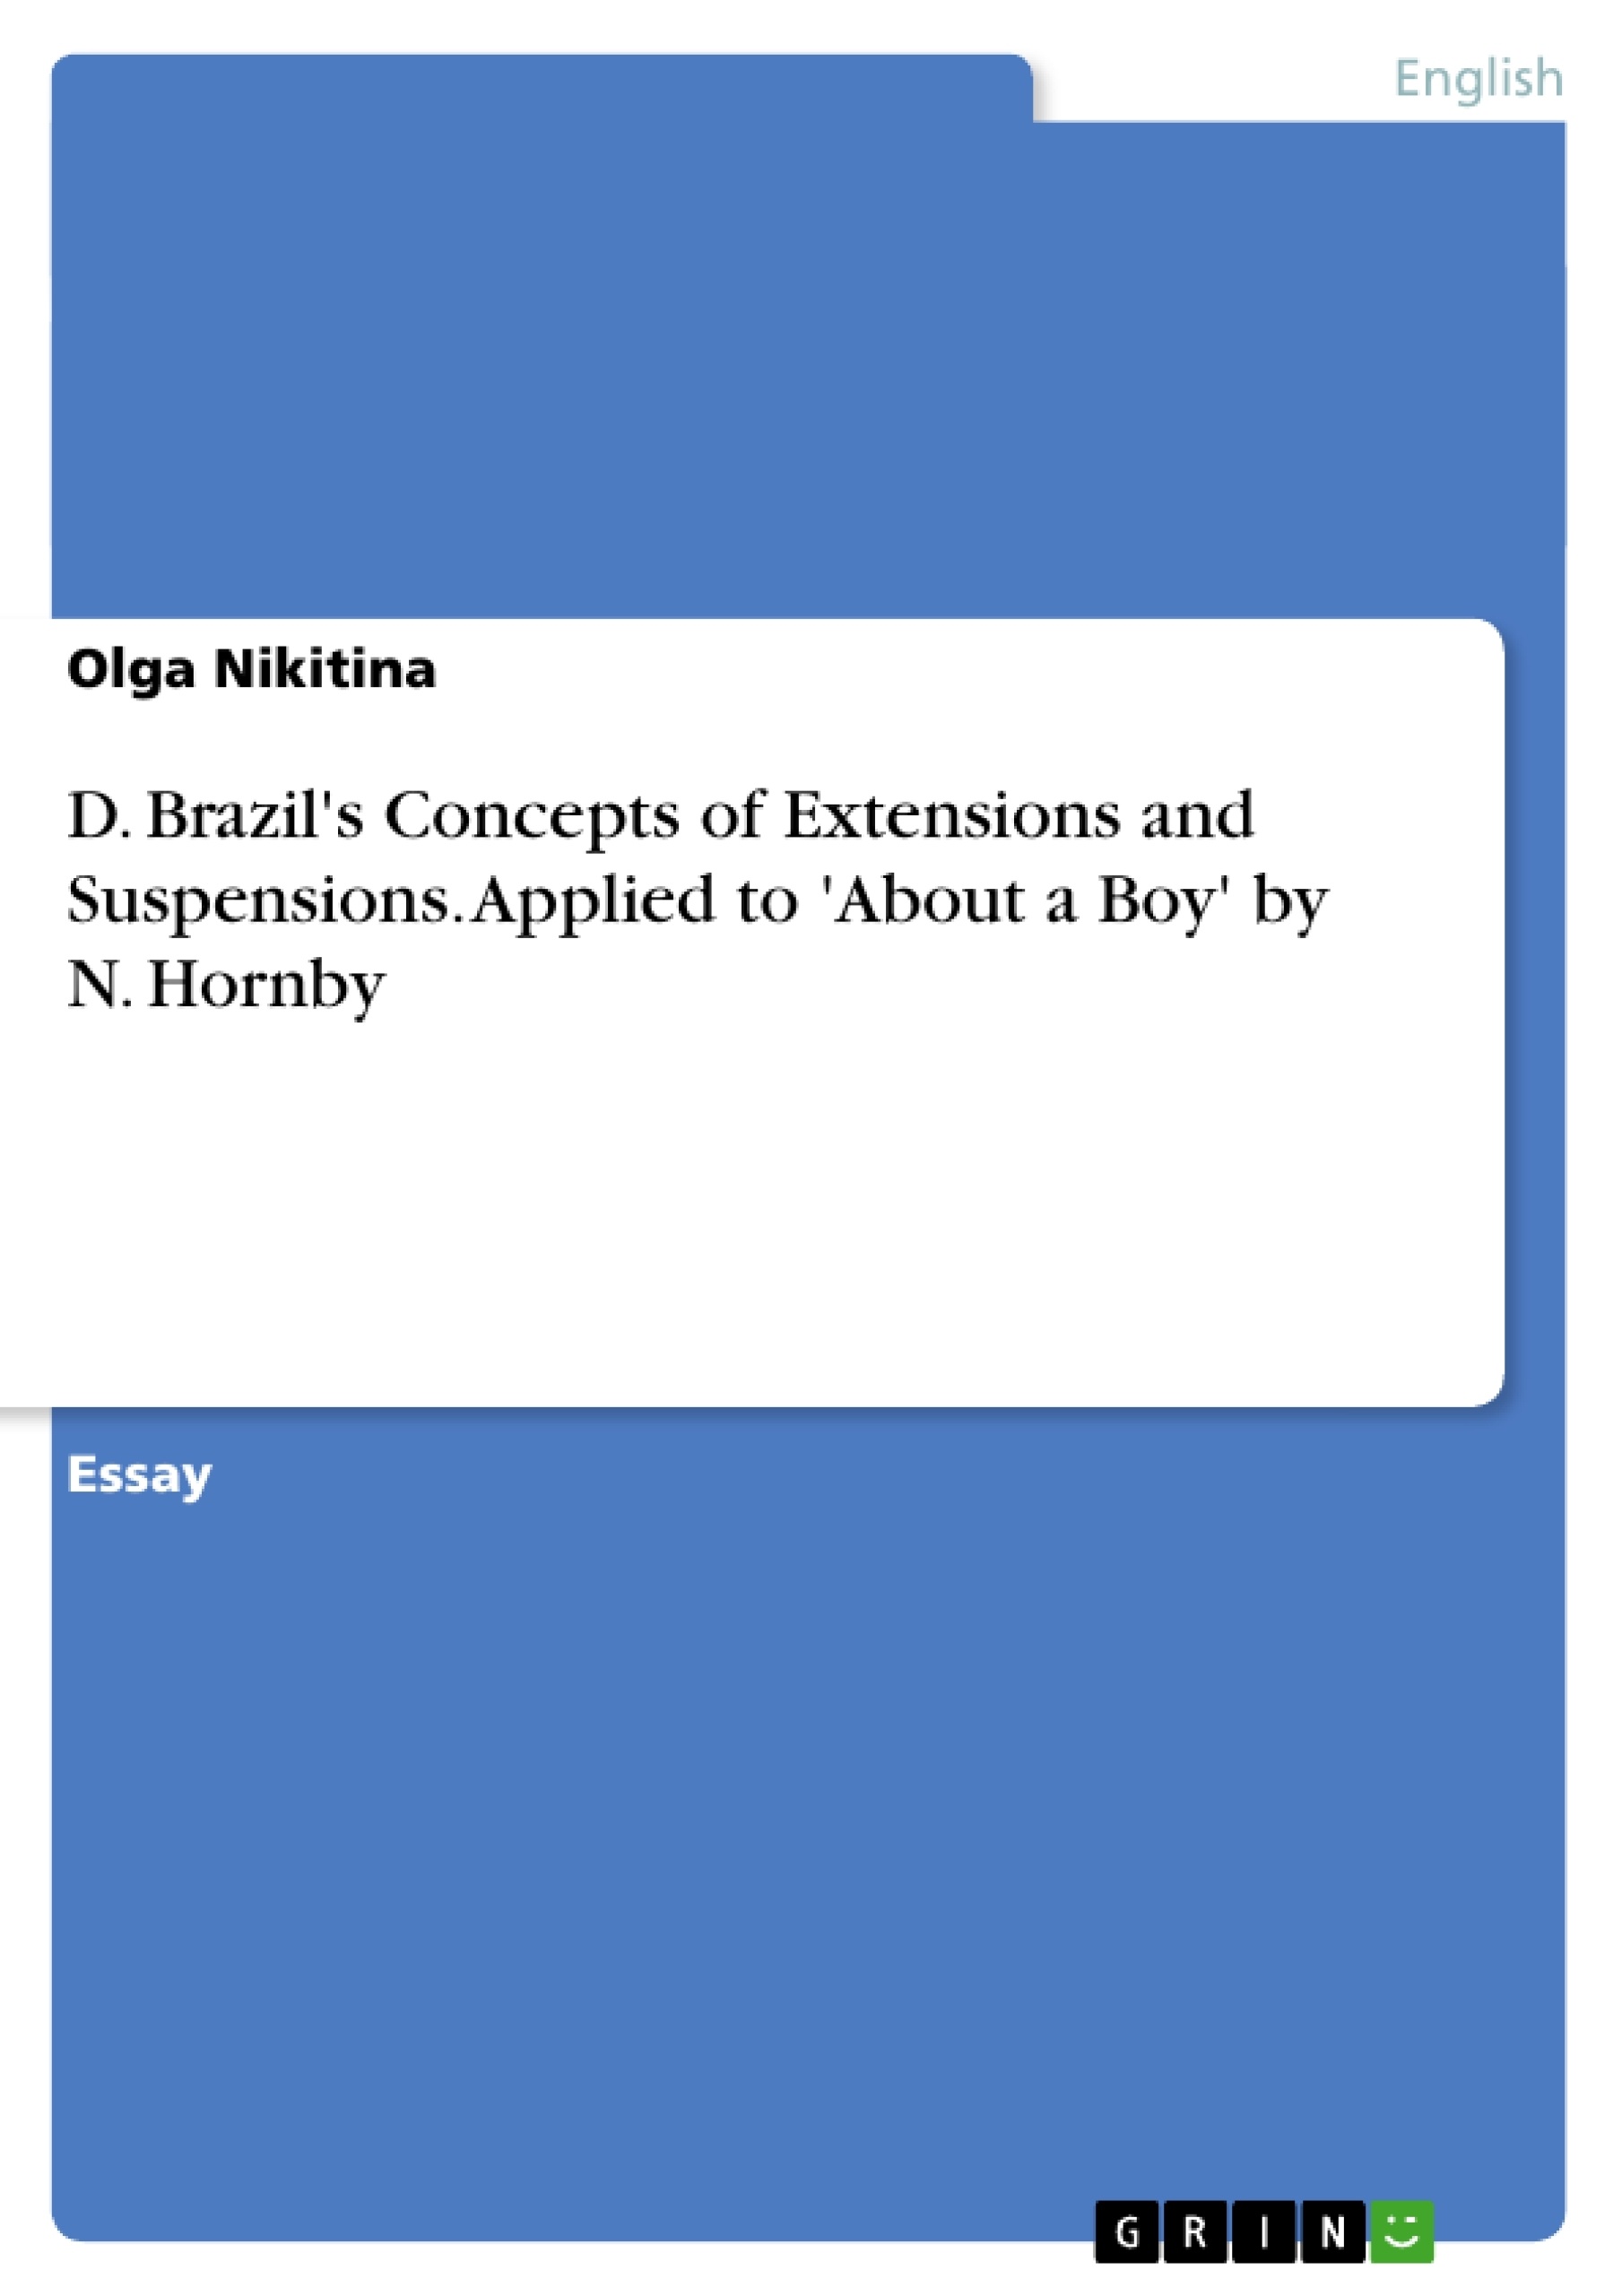 Titel: D. Brazil's Concepts of Extensions and Suspensions. Applied to 'About a Boy' by N. Hornby